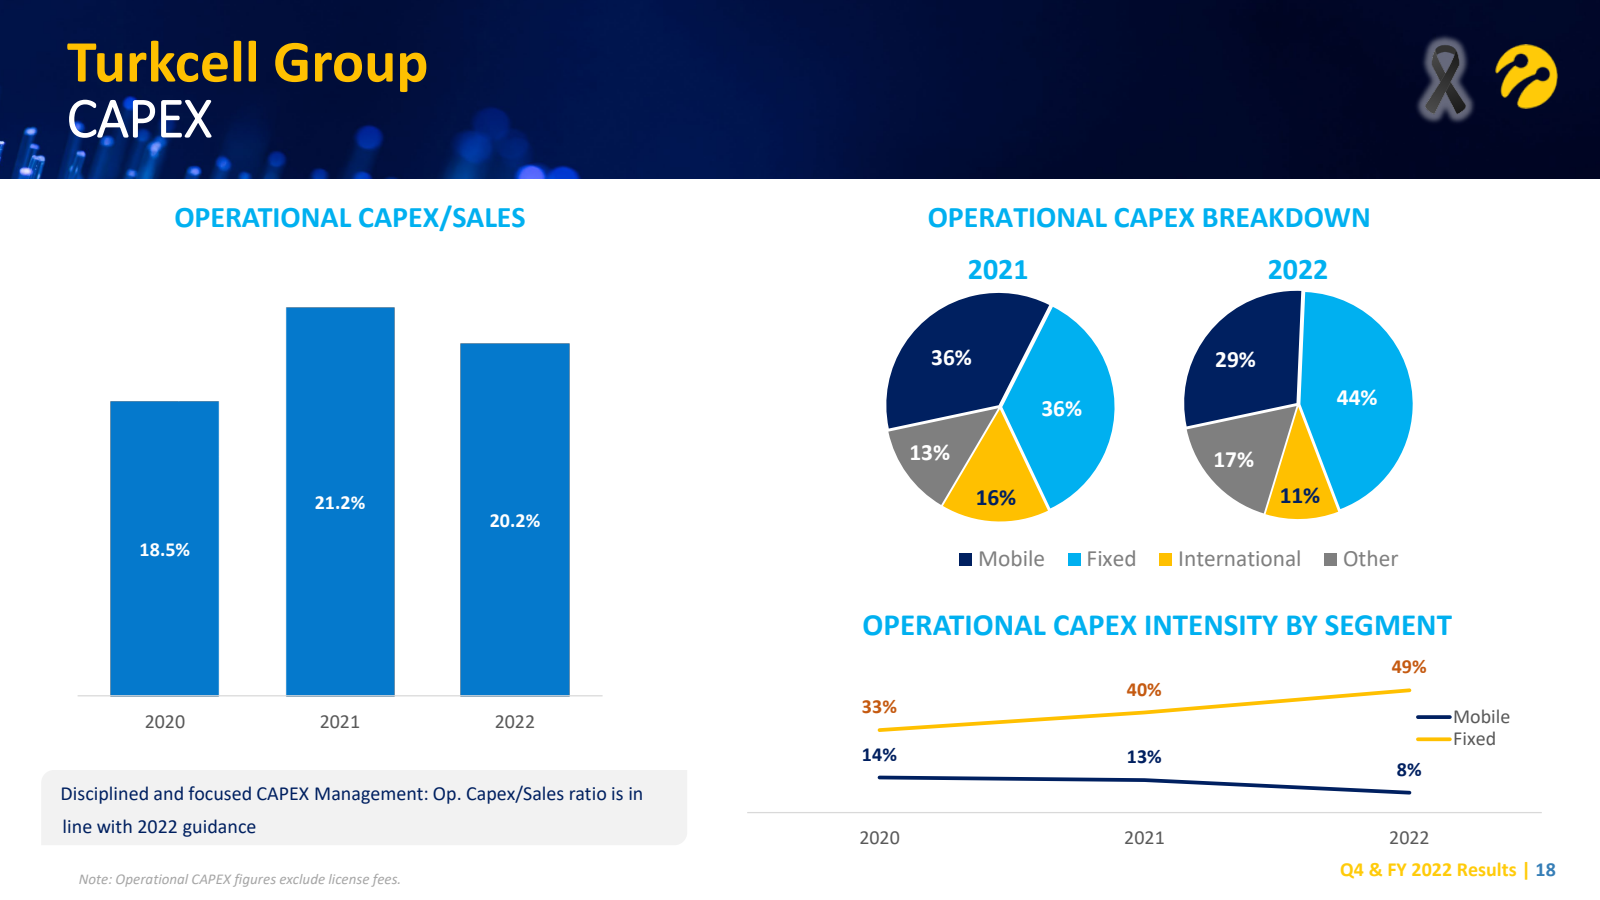 Turkcell Group CAPEX